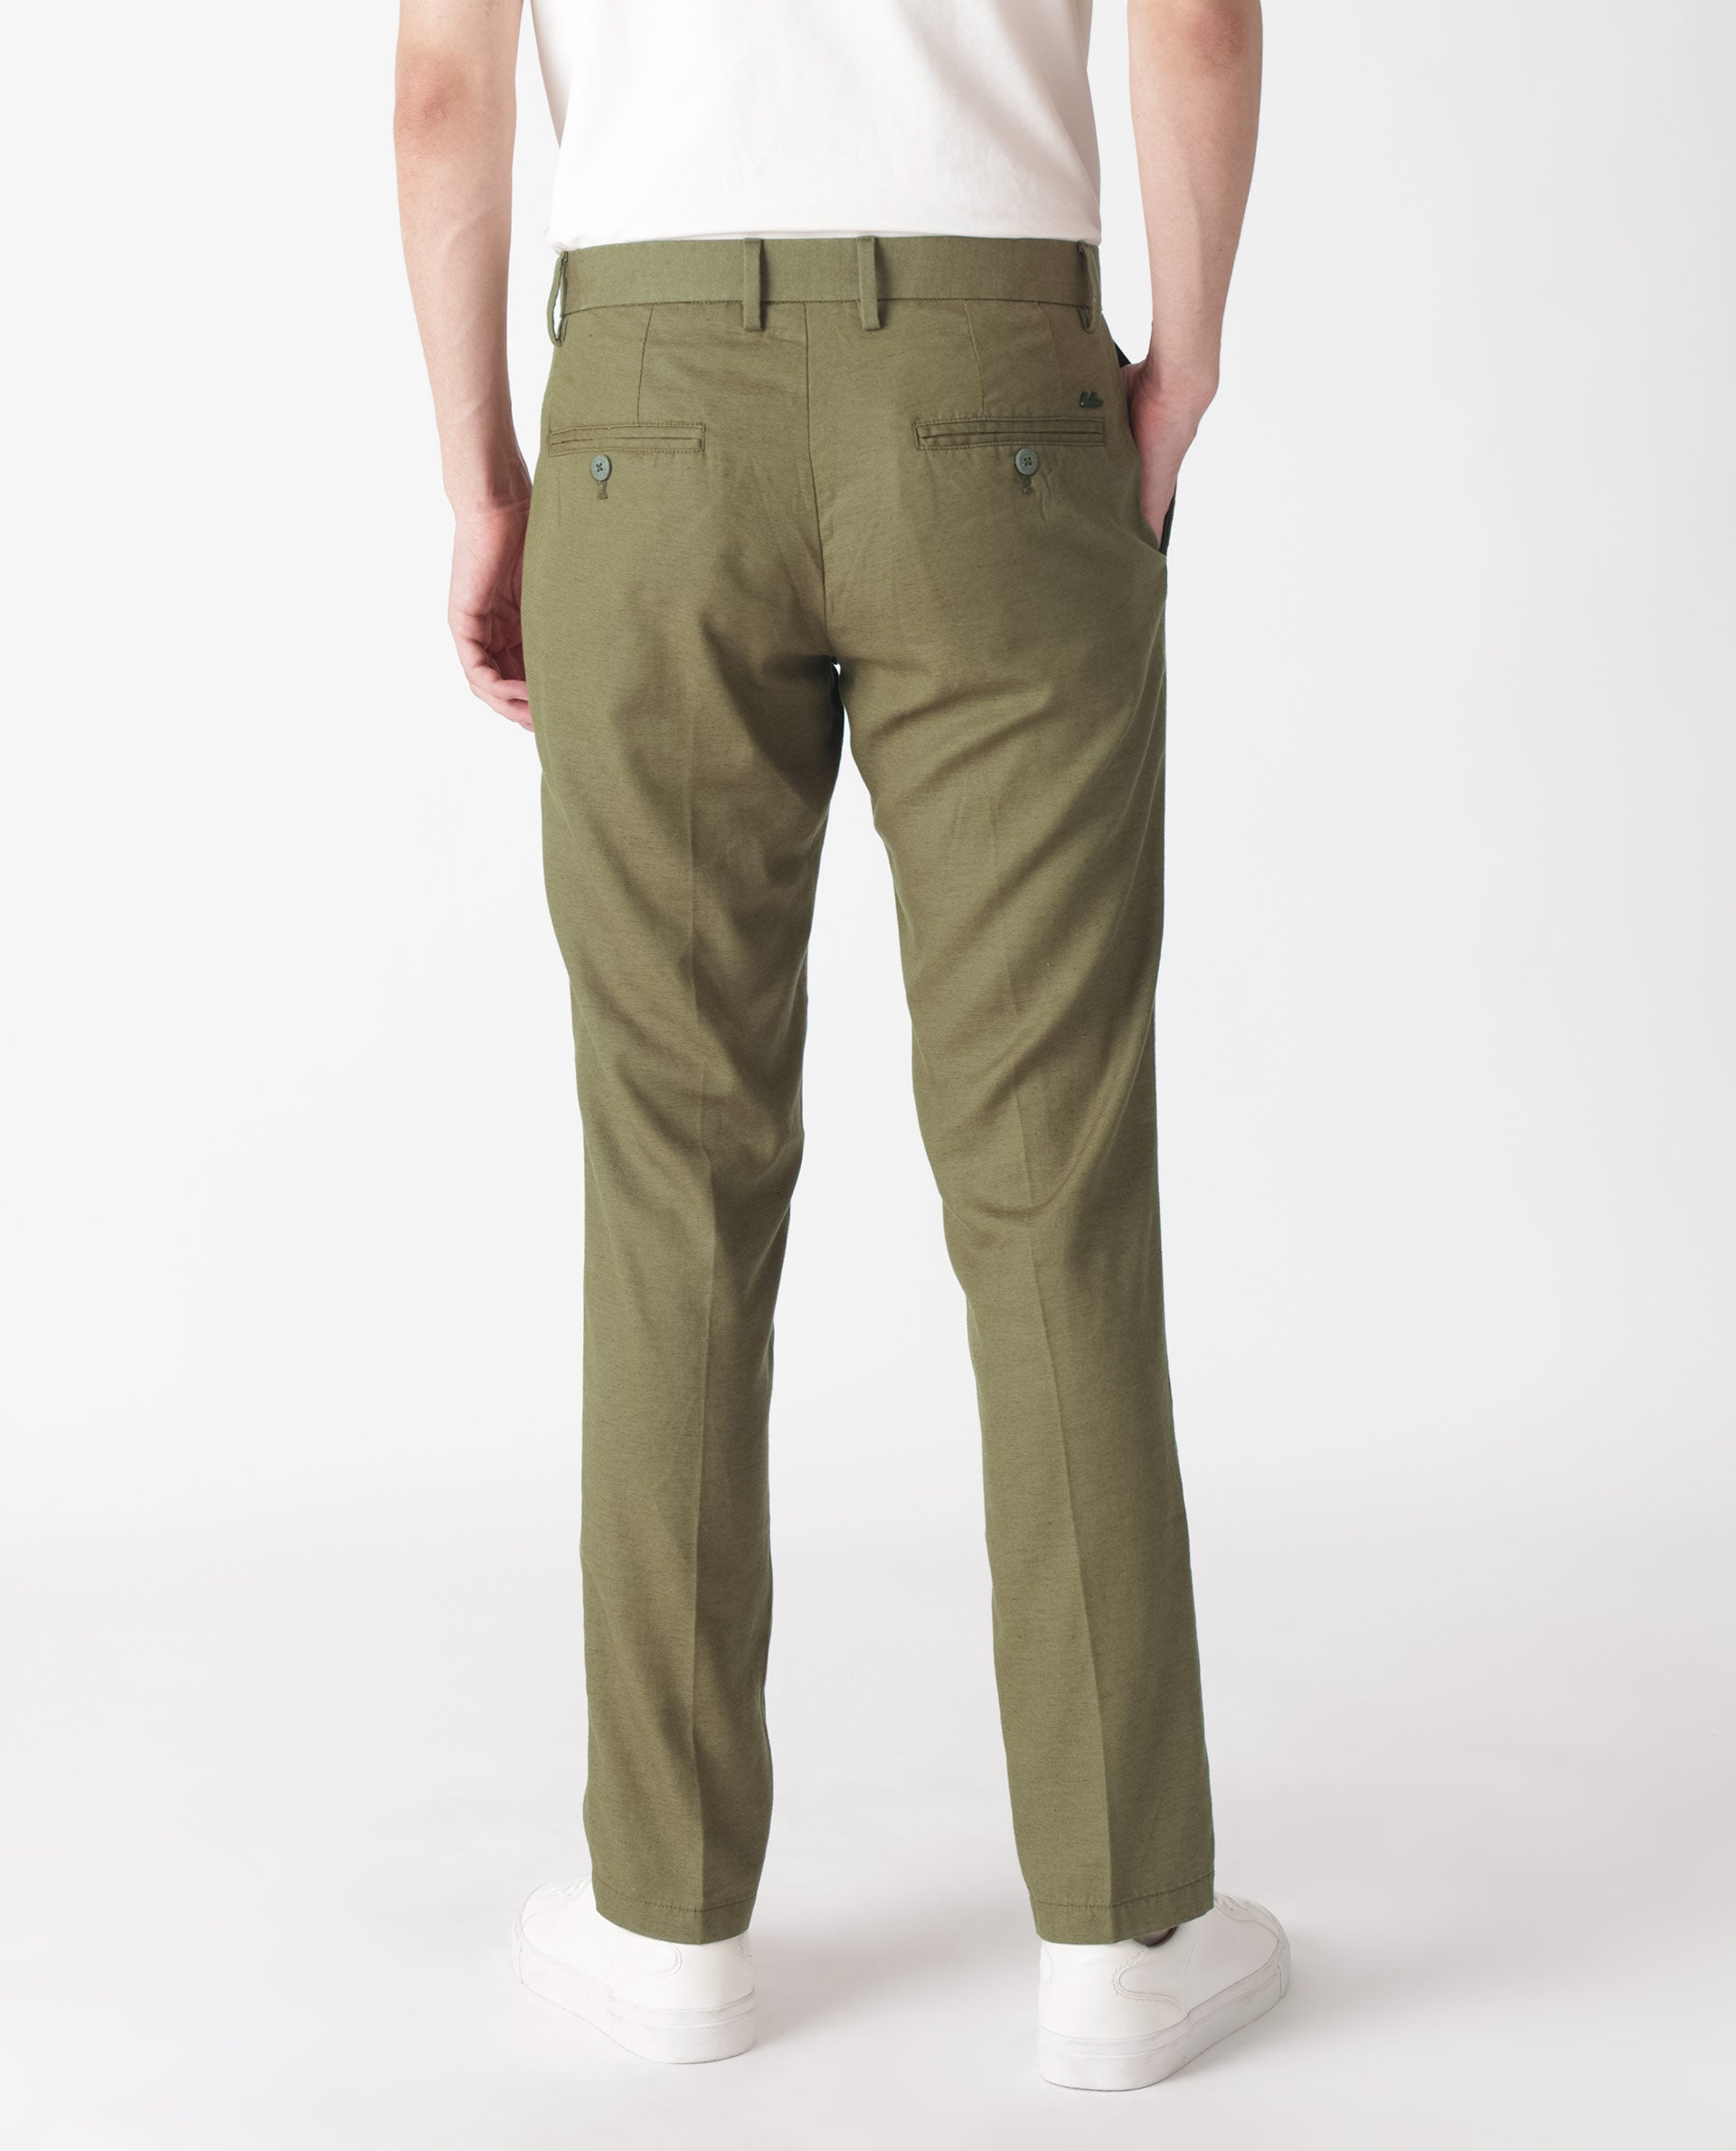 Buy Men Olive Slim Fit Solid Casual Trousers Online  668996  Allen Solly